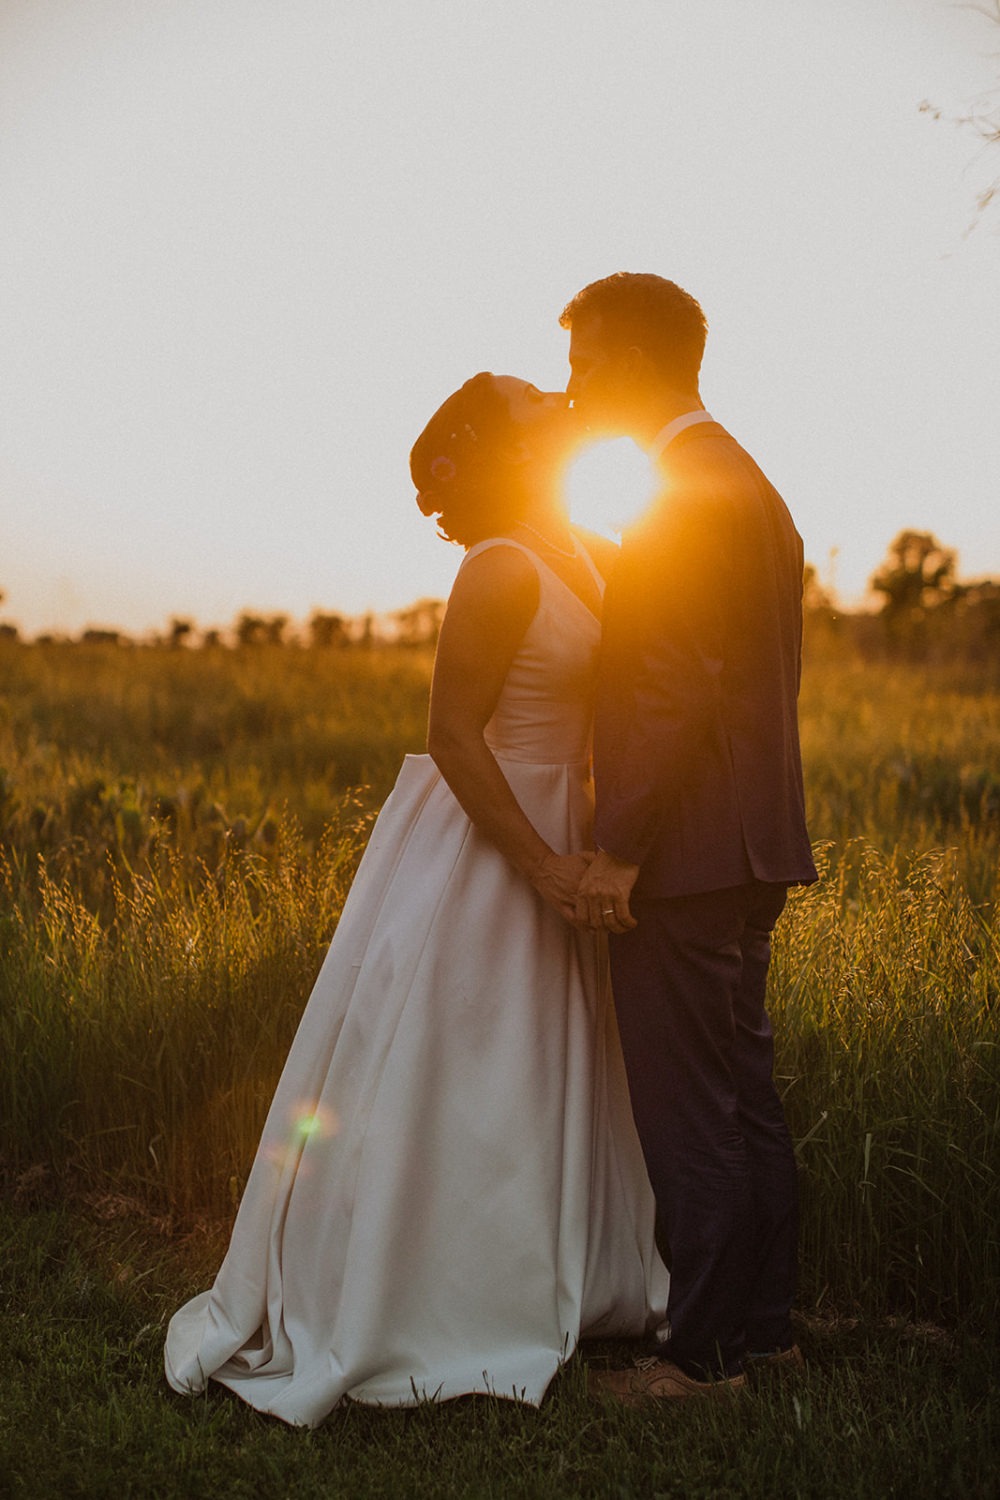 Couple kisses in a sunset field at nature wedding venue